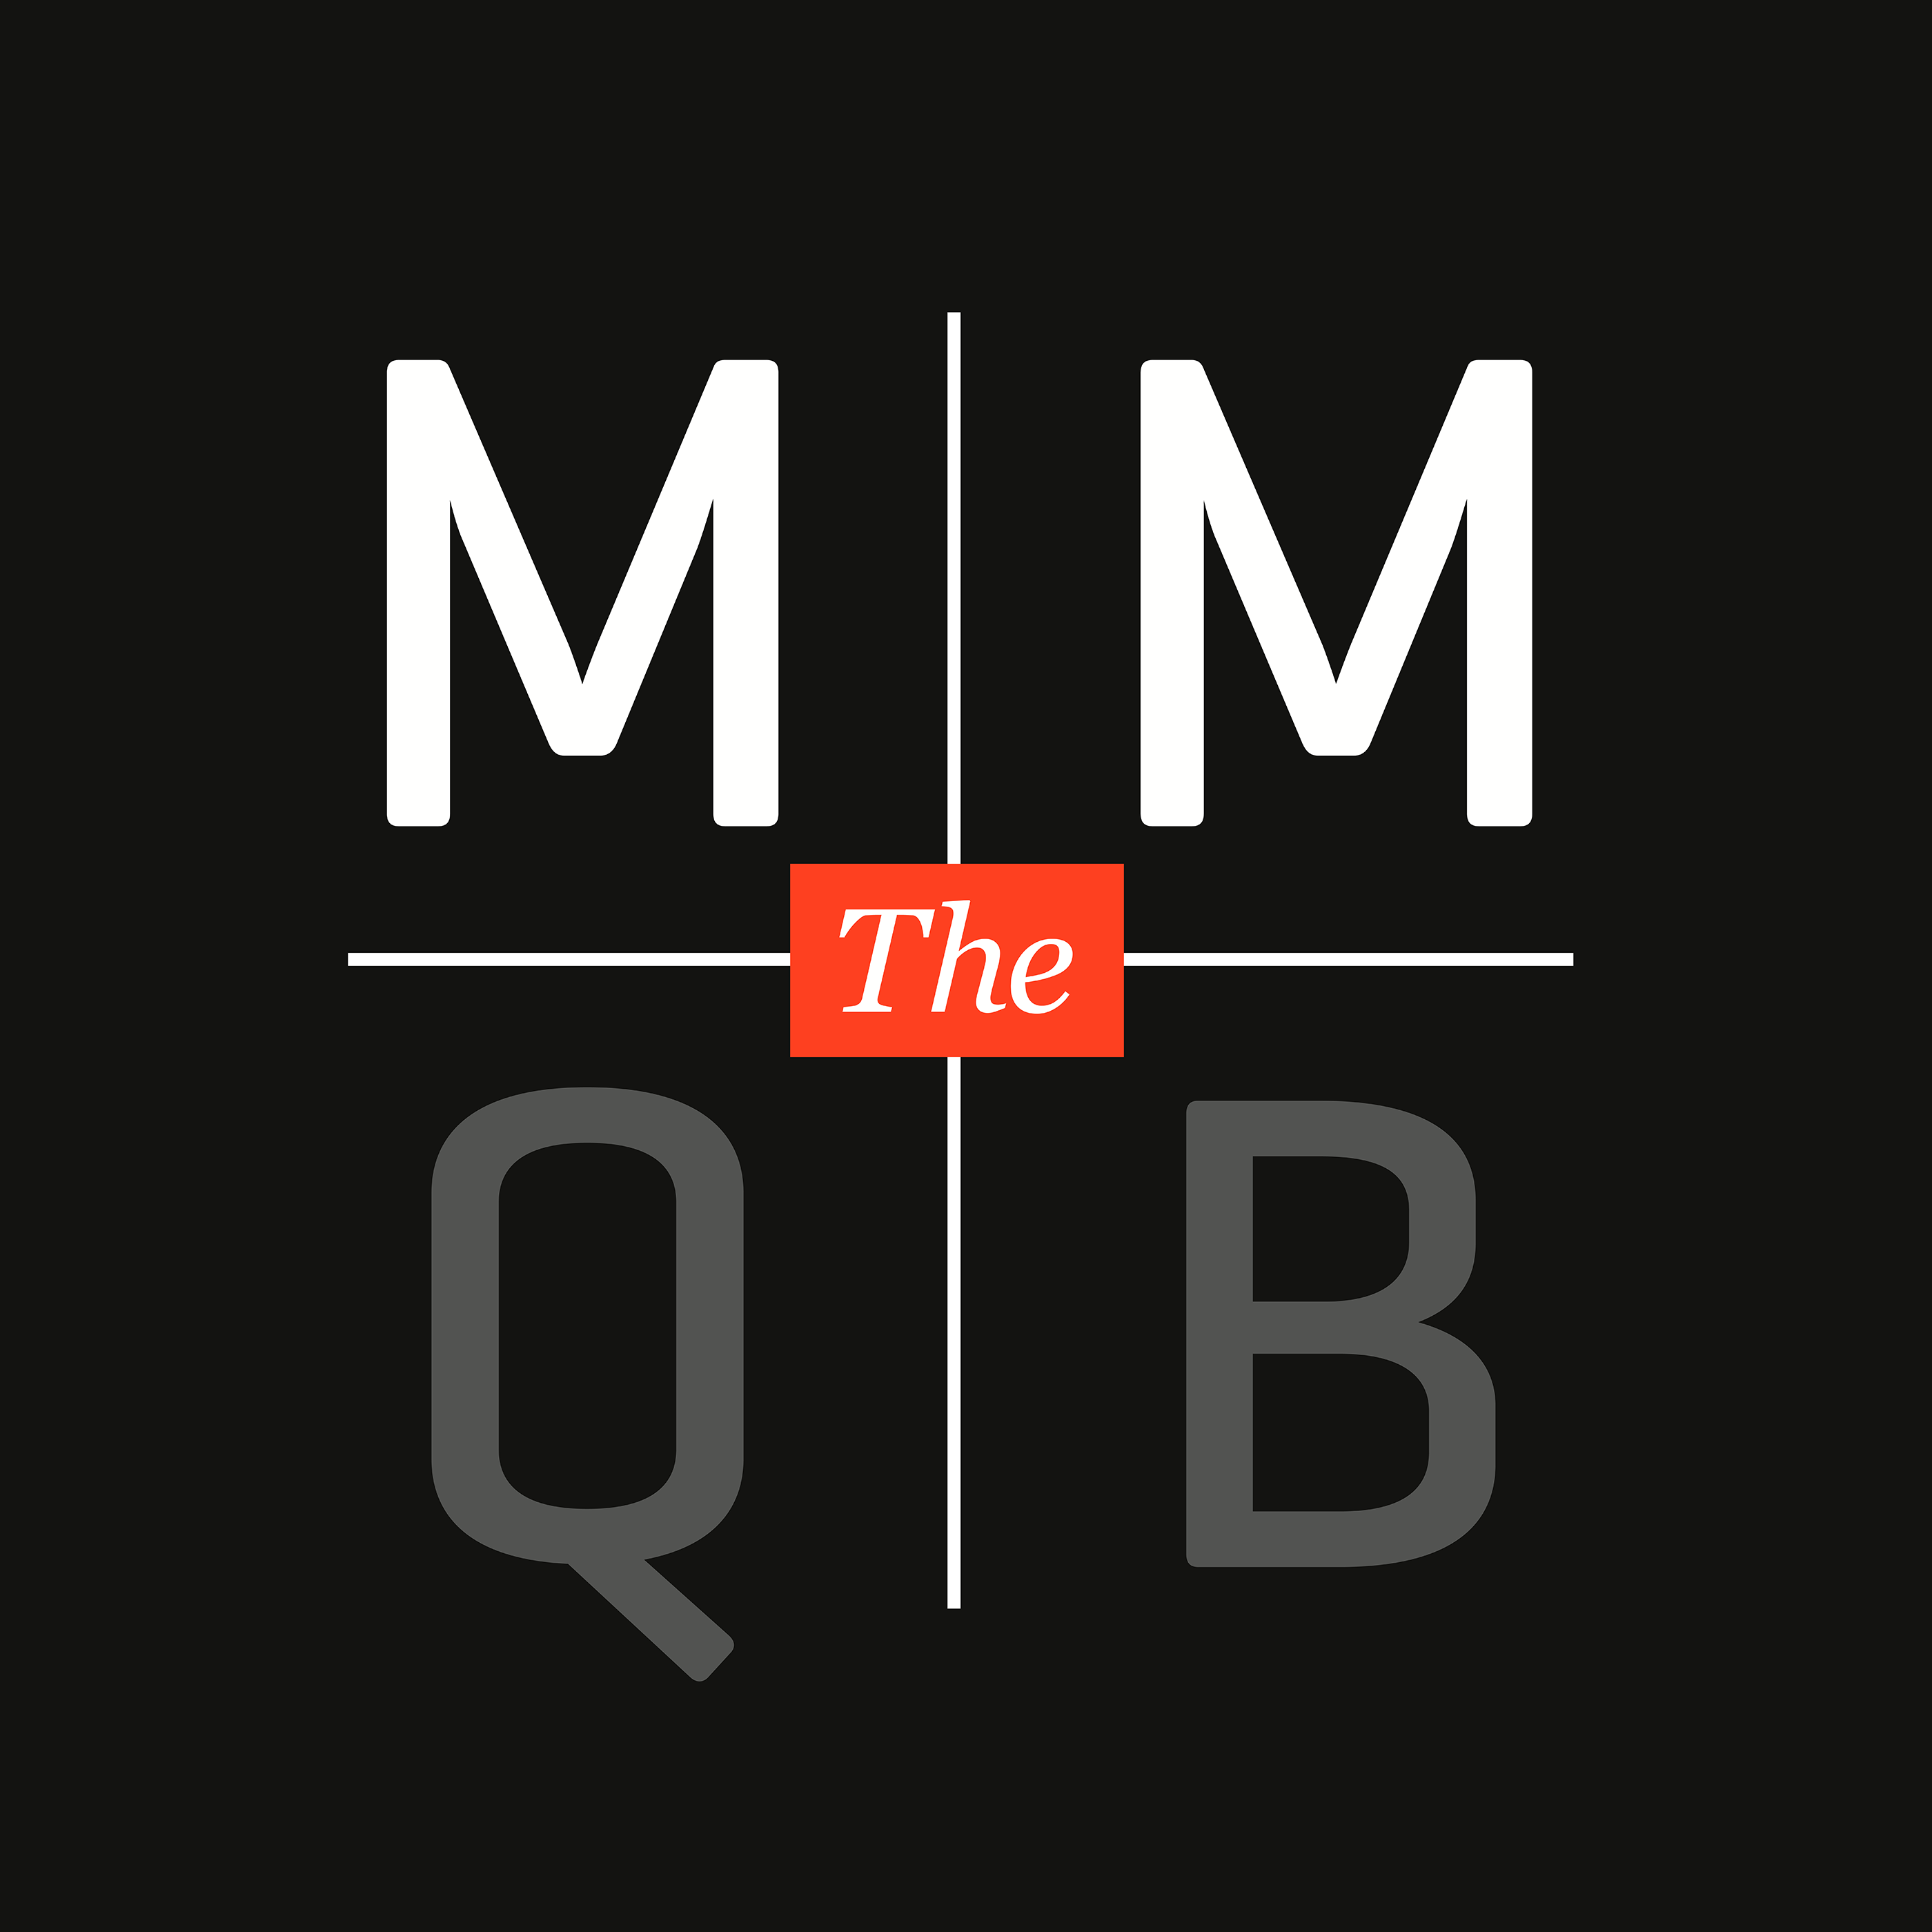 Fresh update on "w c. m chase" discussed on The MMQB NFL Podcast